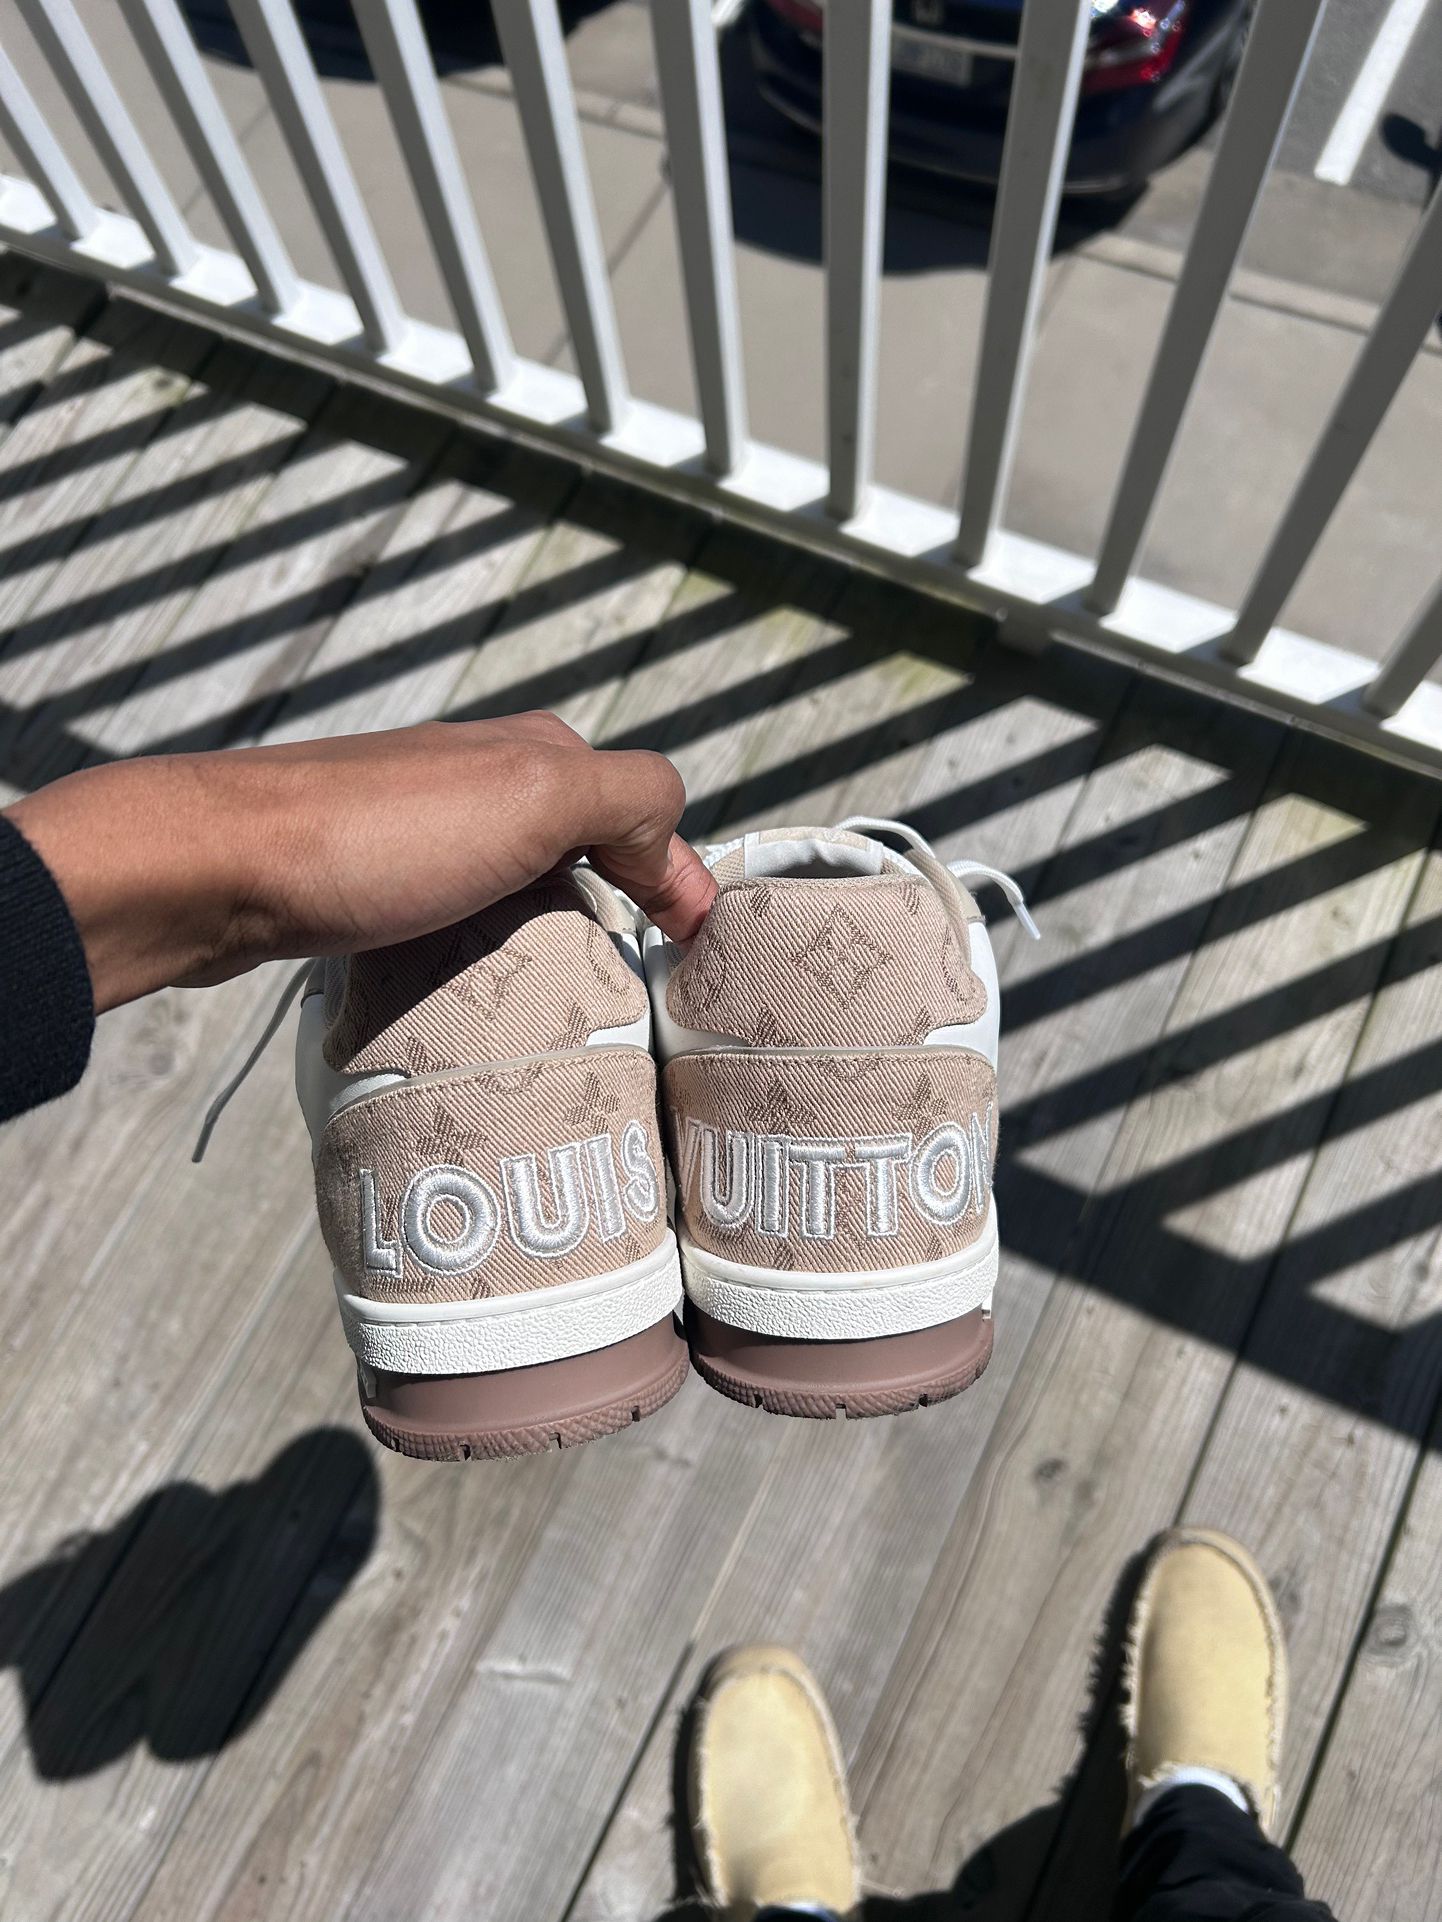 Louis Vuitton Trainers 9.5 for Sale in Brentwood, NC - OfferUp